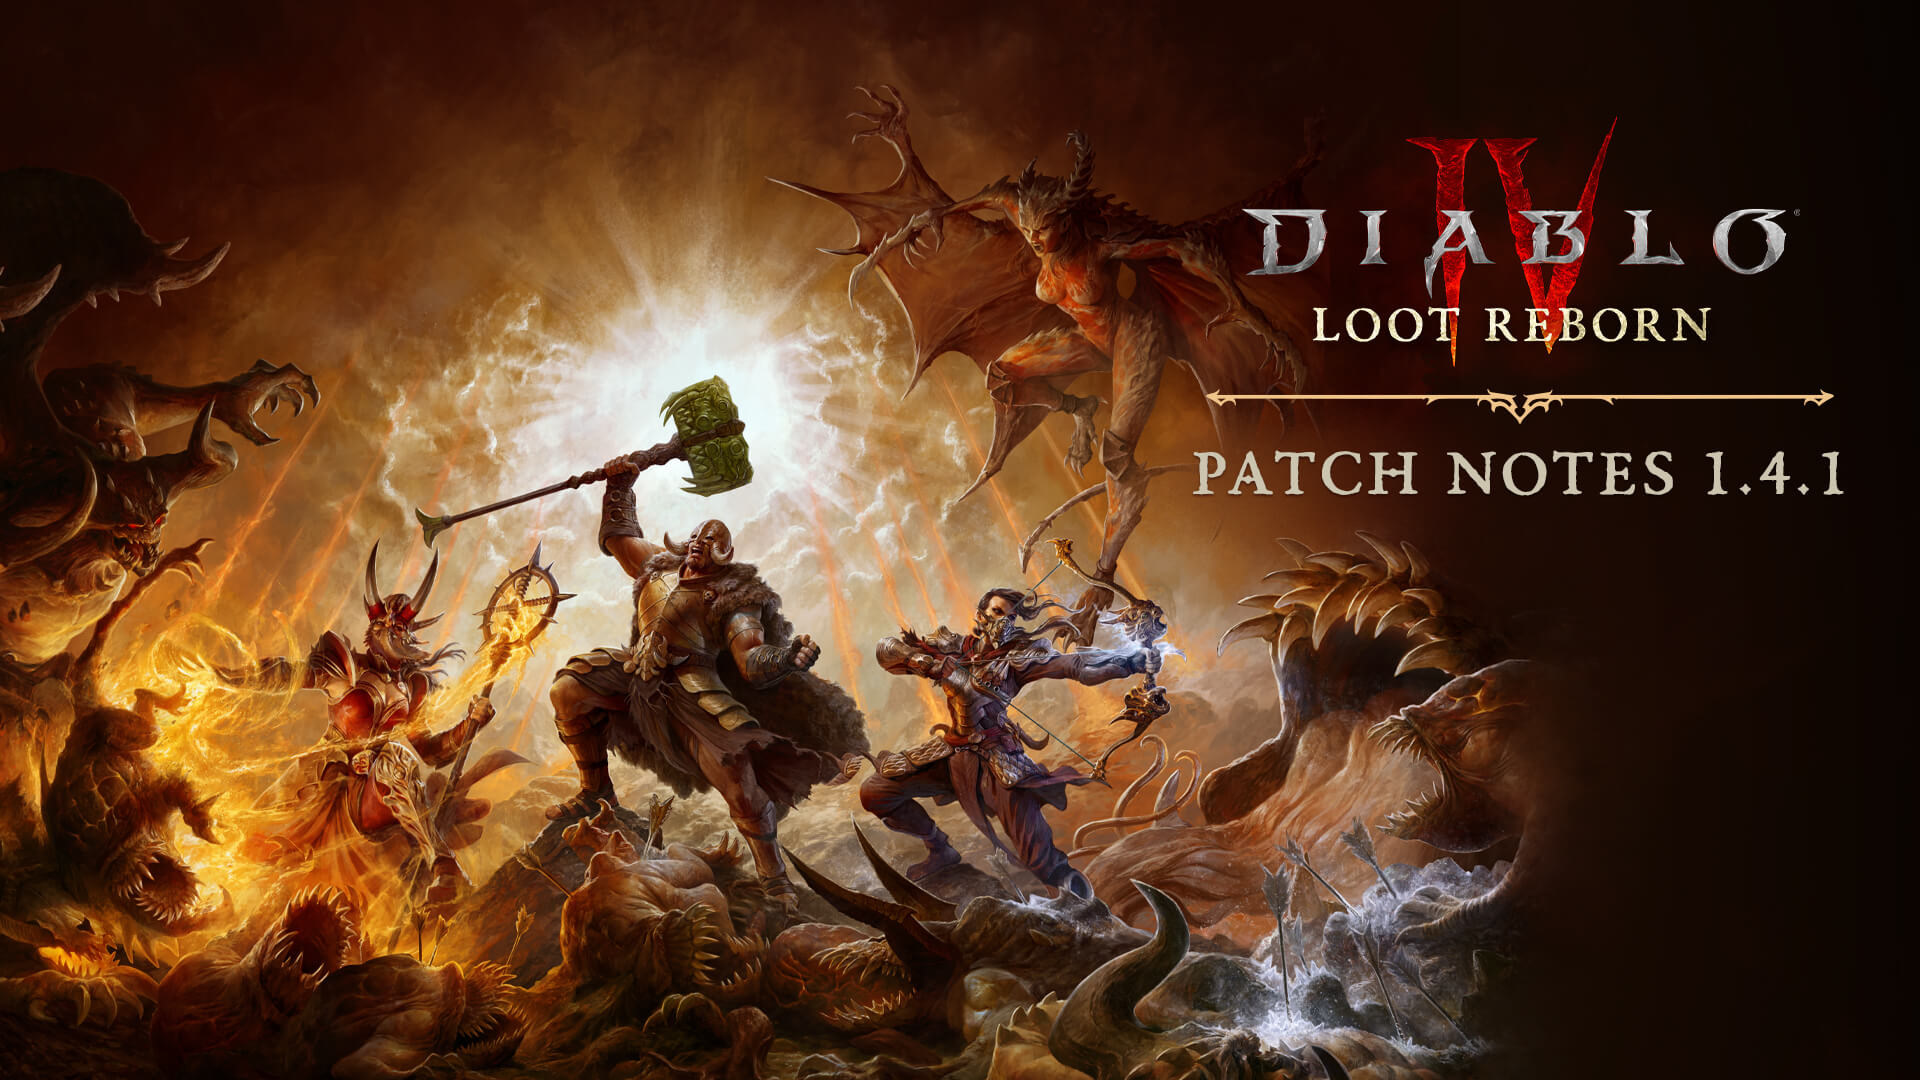 Diablo 4 Patch 1.4.1 Notes: Scattered Prisms, Masterworking, Lilith, Helltide Fixes, Small Class Changes and More!